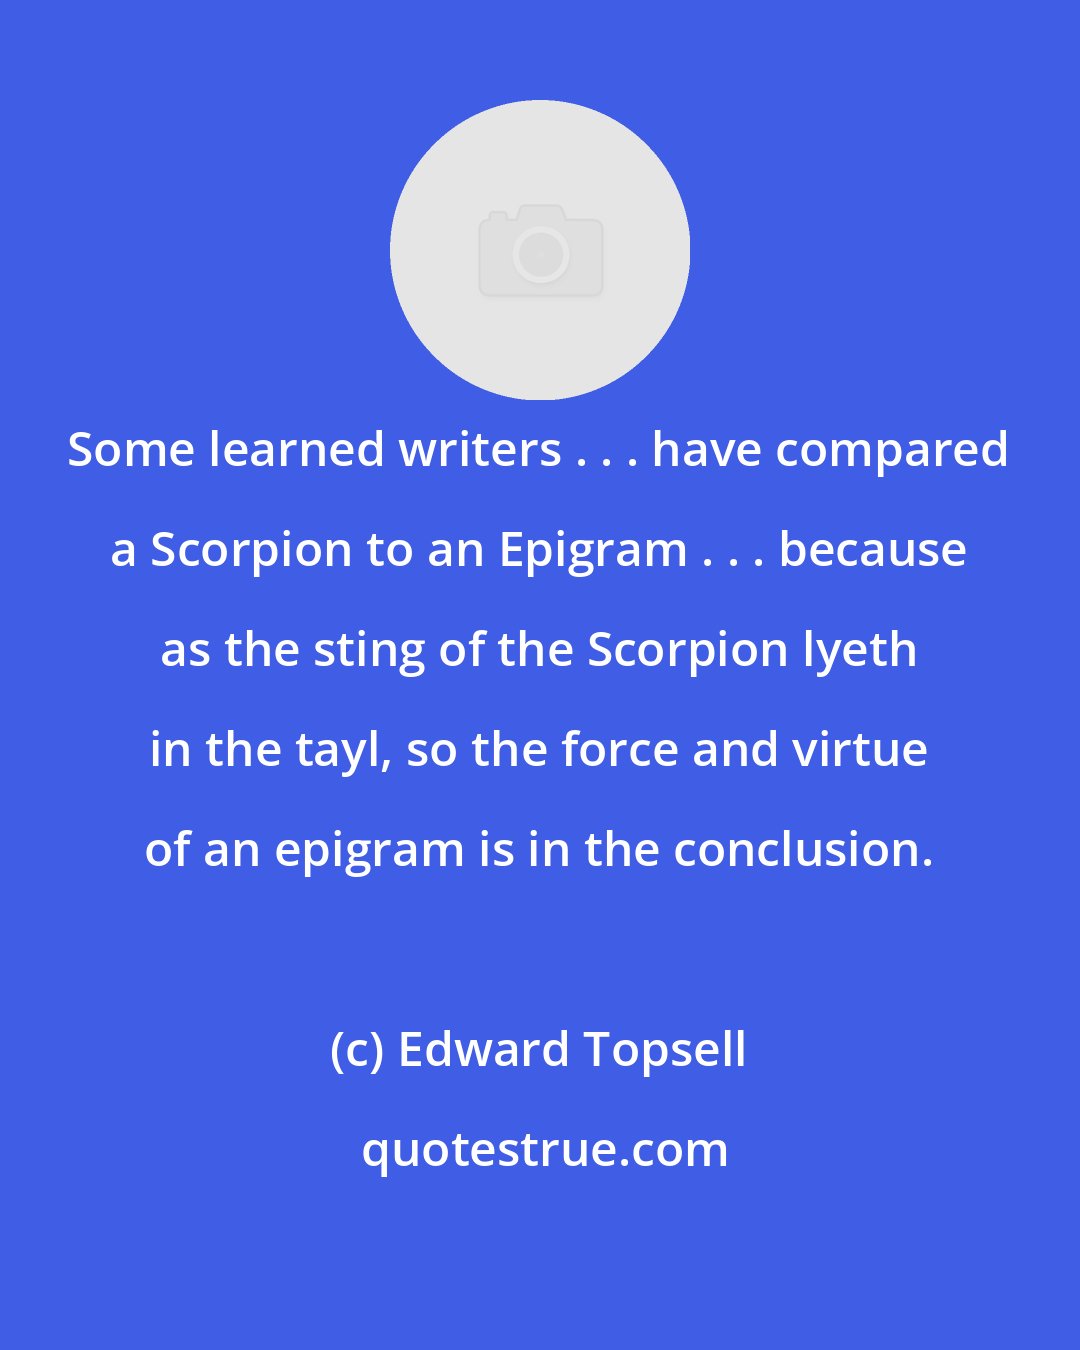 Edward Topsell: Some learned writers . . . have compared a Scorpion to an Epigram . . . because as the sting of the Scorpion lyeth in the tayl, so the force and virtue of an epigram is in the conclusion.